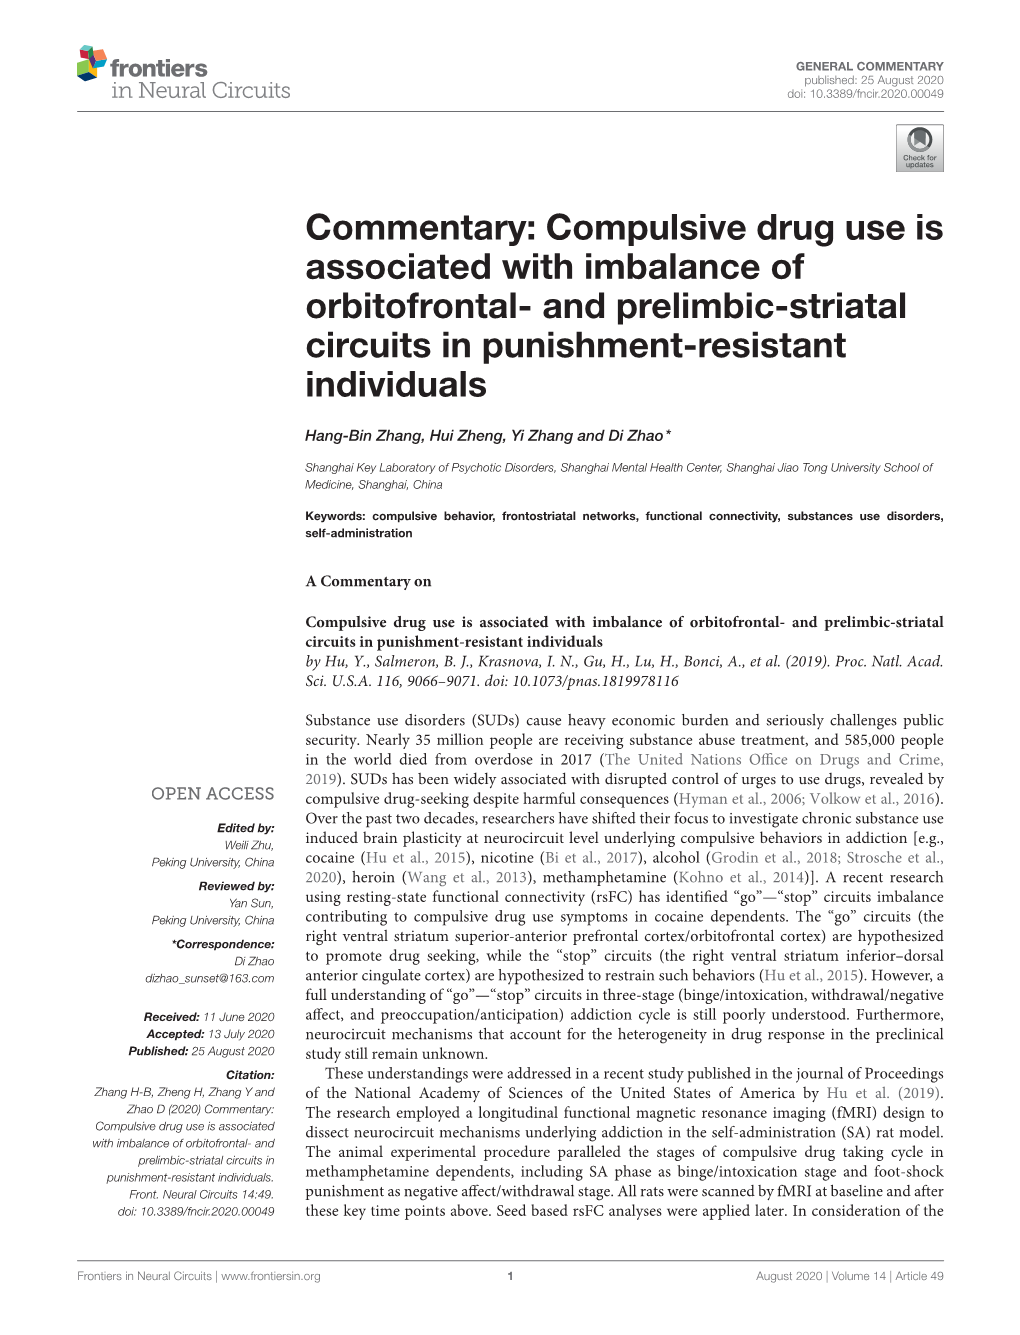 Compulsive Drug Use Is Associated with Imbalance of Orbitofrontal- and Prelimbic-Striatal Circuits in Punishment-Resistant Individuals